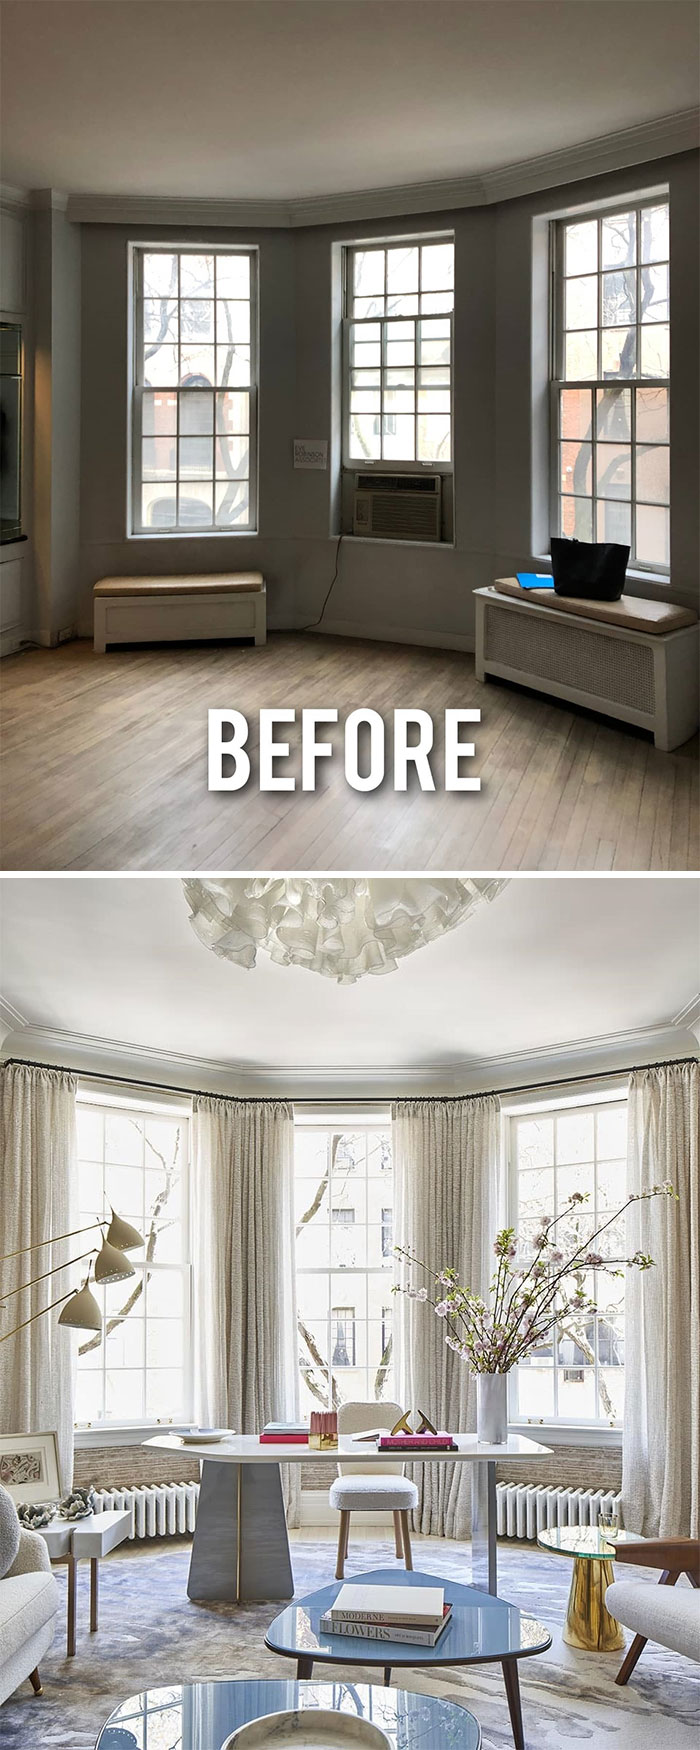 @everobinsonassociates Did It Again! Check Out This Renovation!